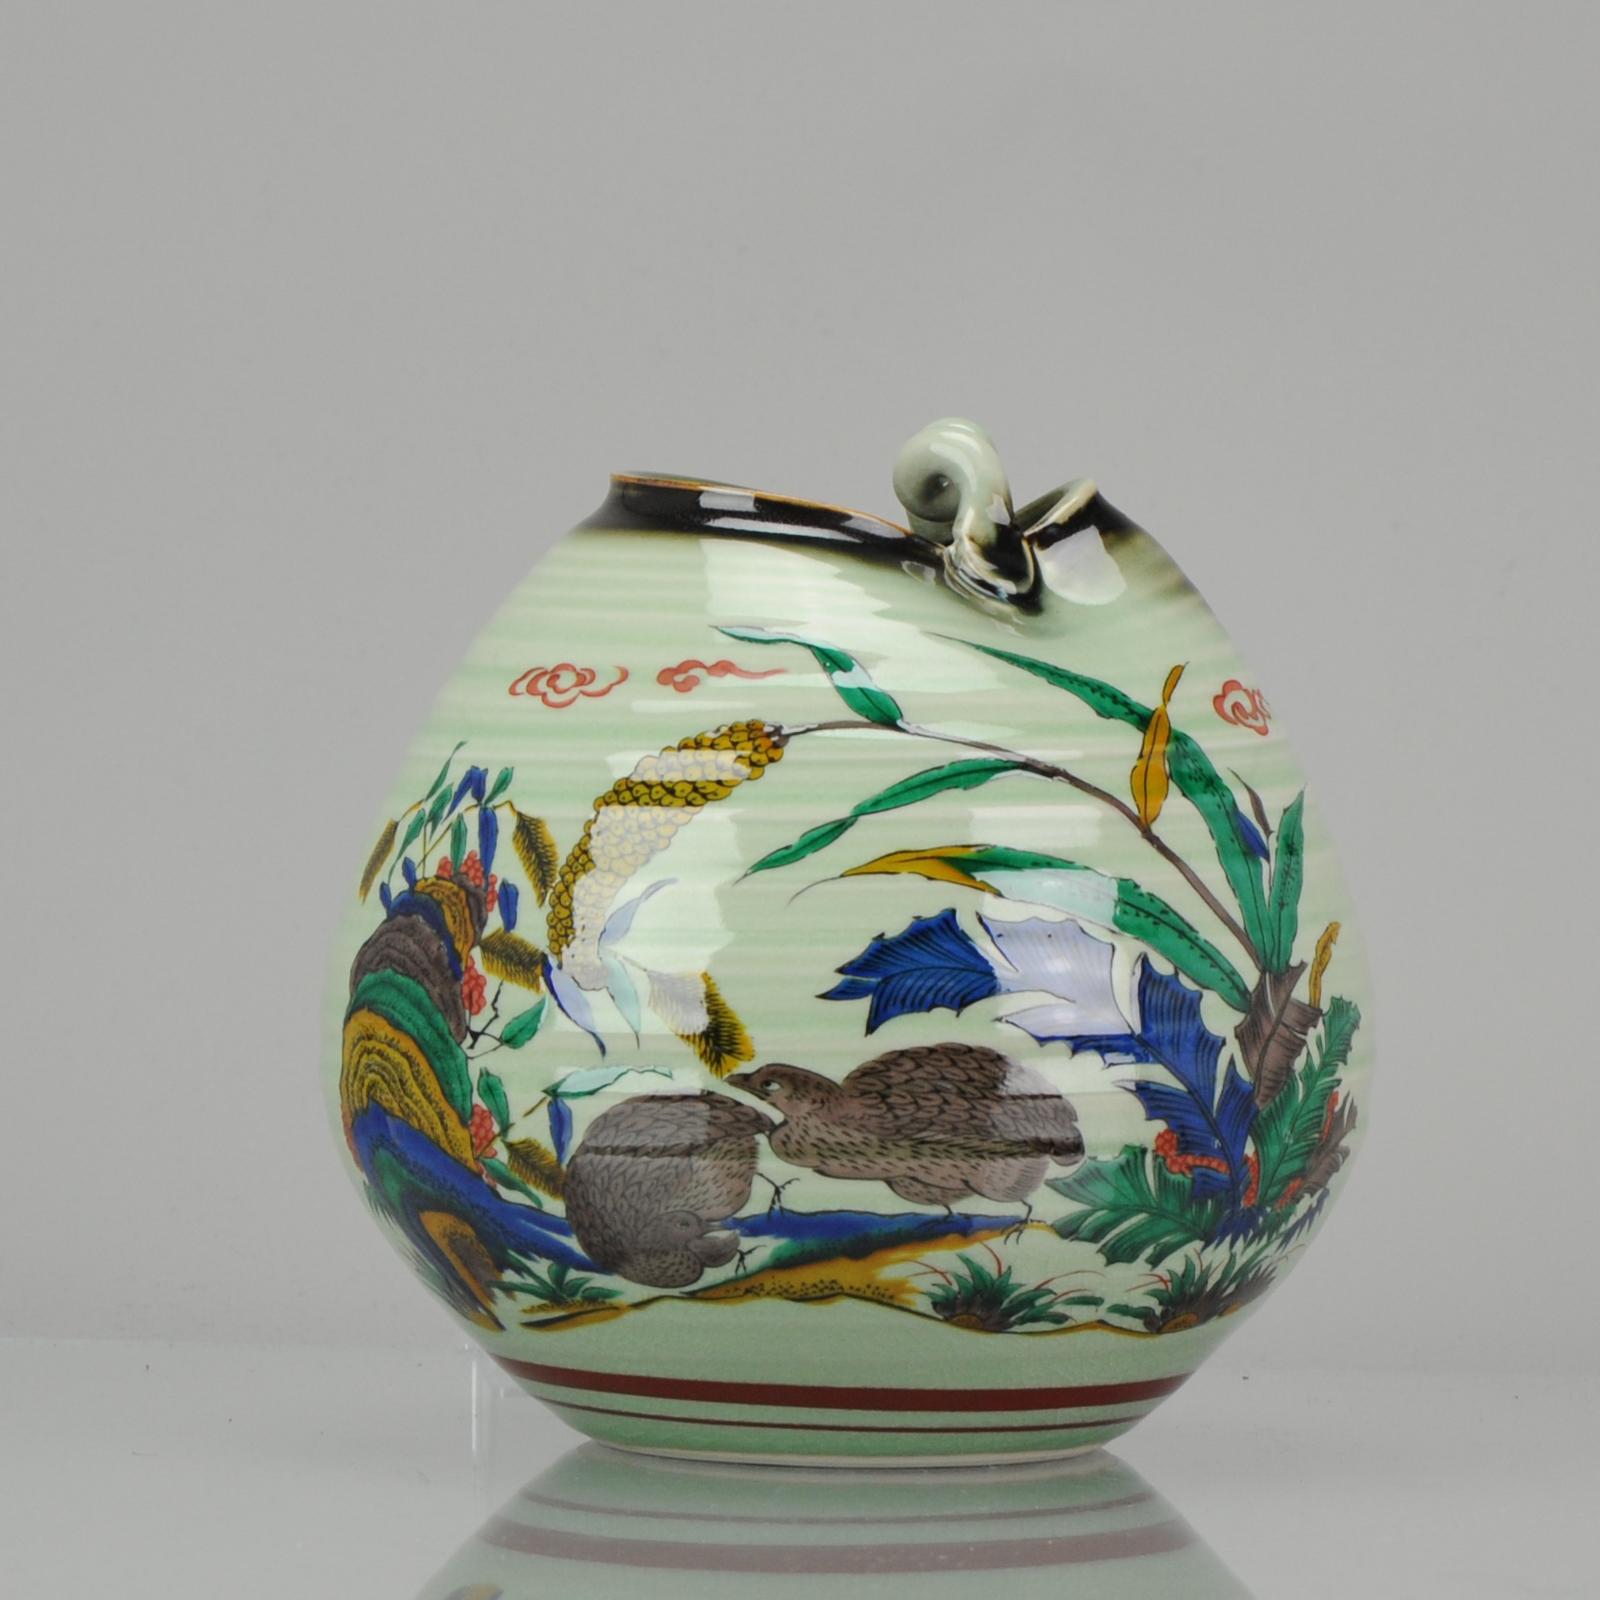 Contemporary Modern Japanese 21st Century Porcelain Kutani Vase with Two Quails For Sale